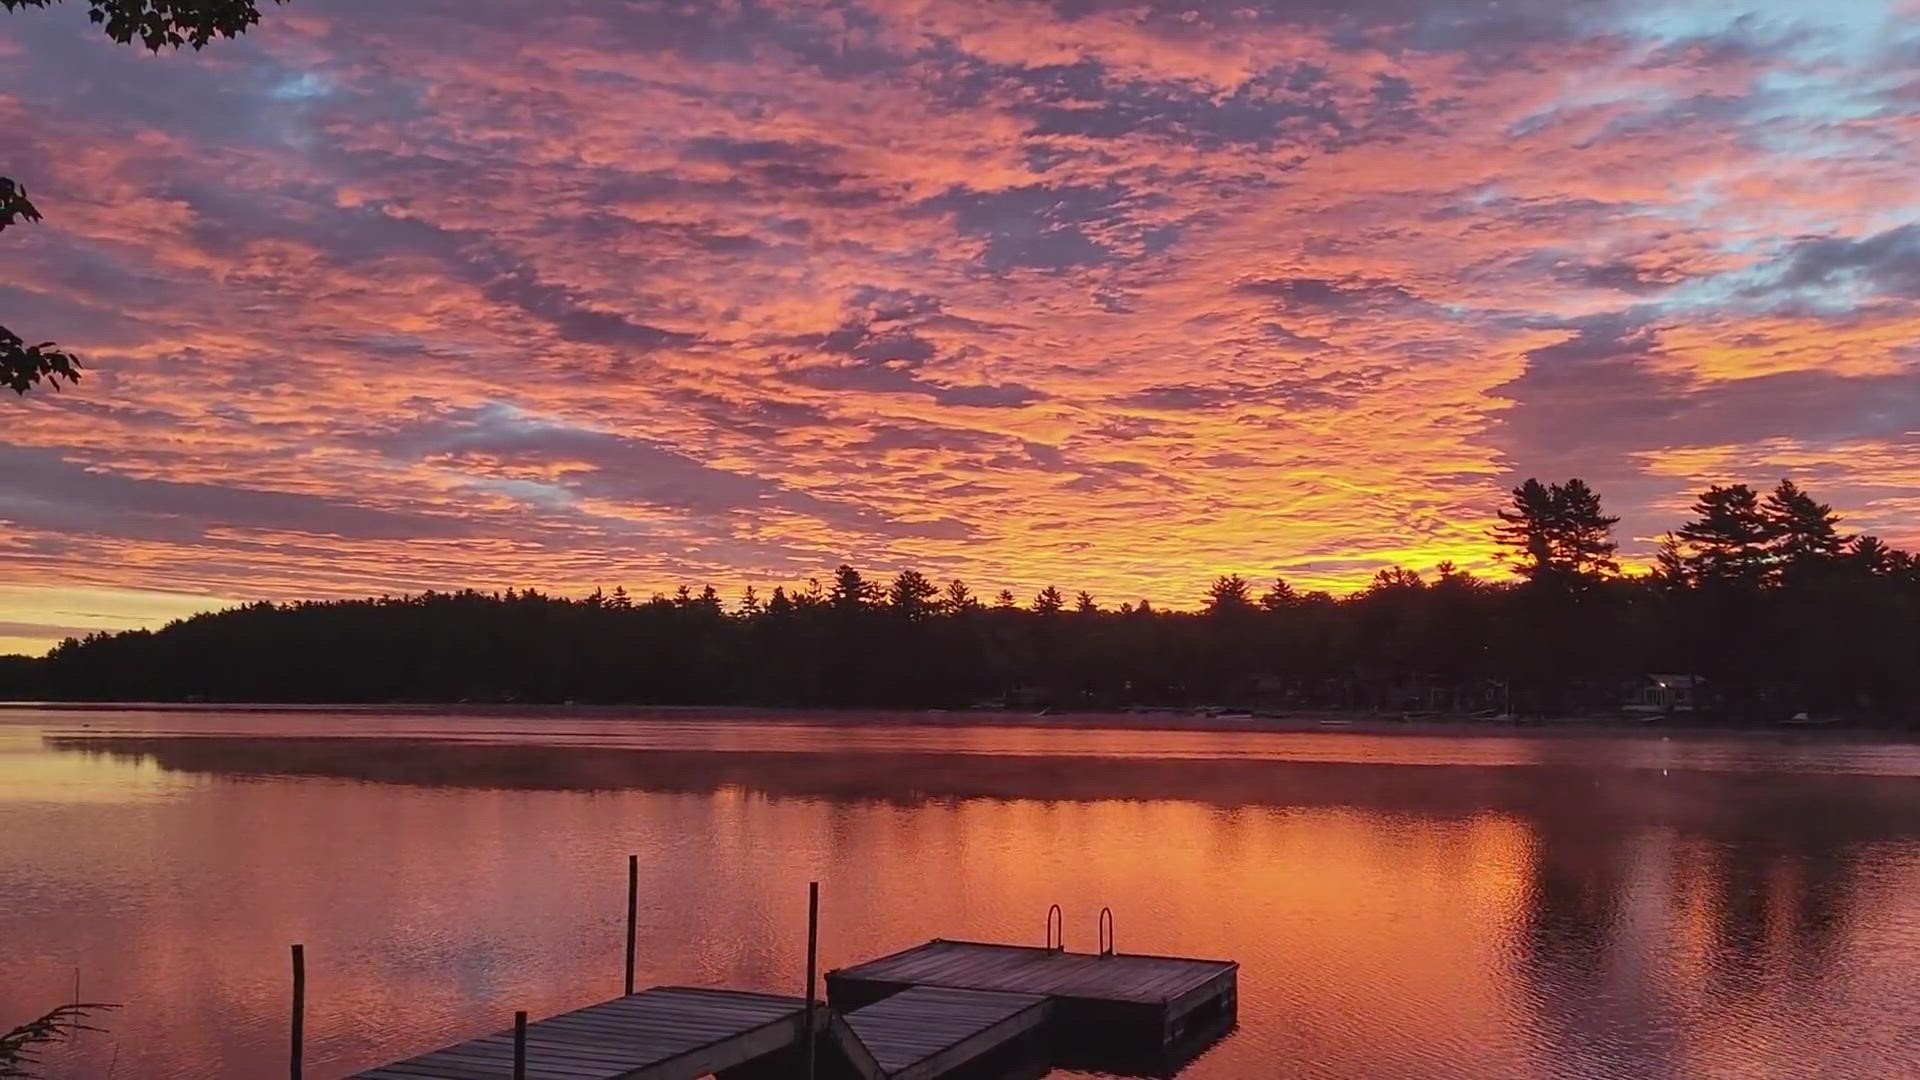 View from my camp on Sheepscot Lake in Palermo
Credit: Nicole Morin-Scribner